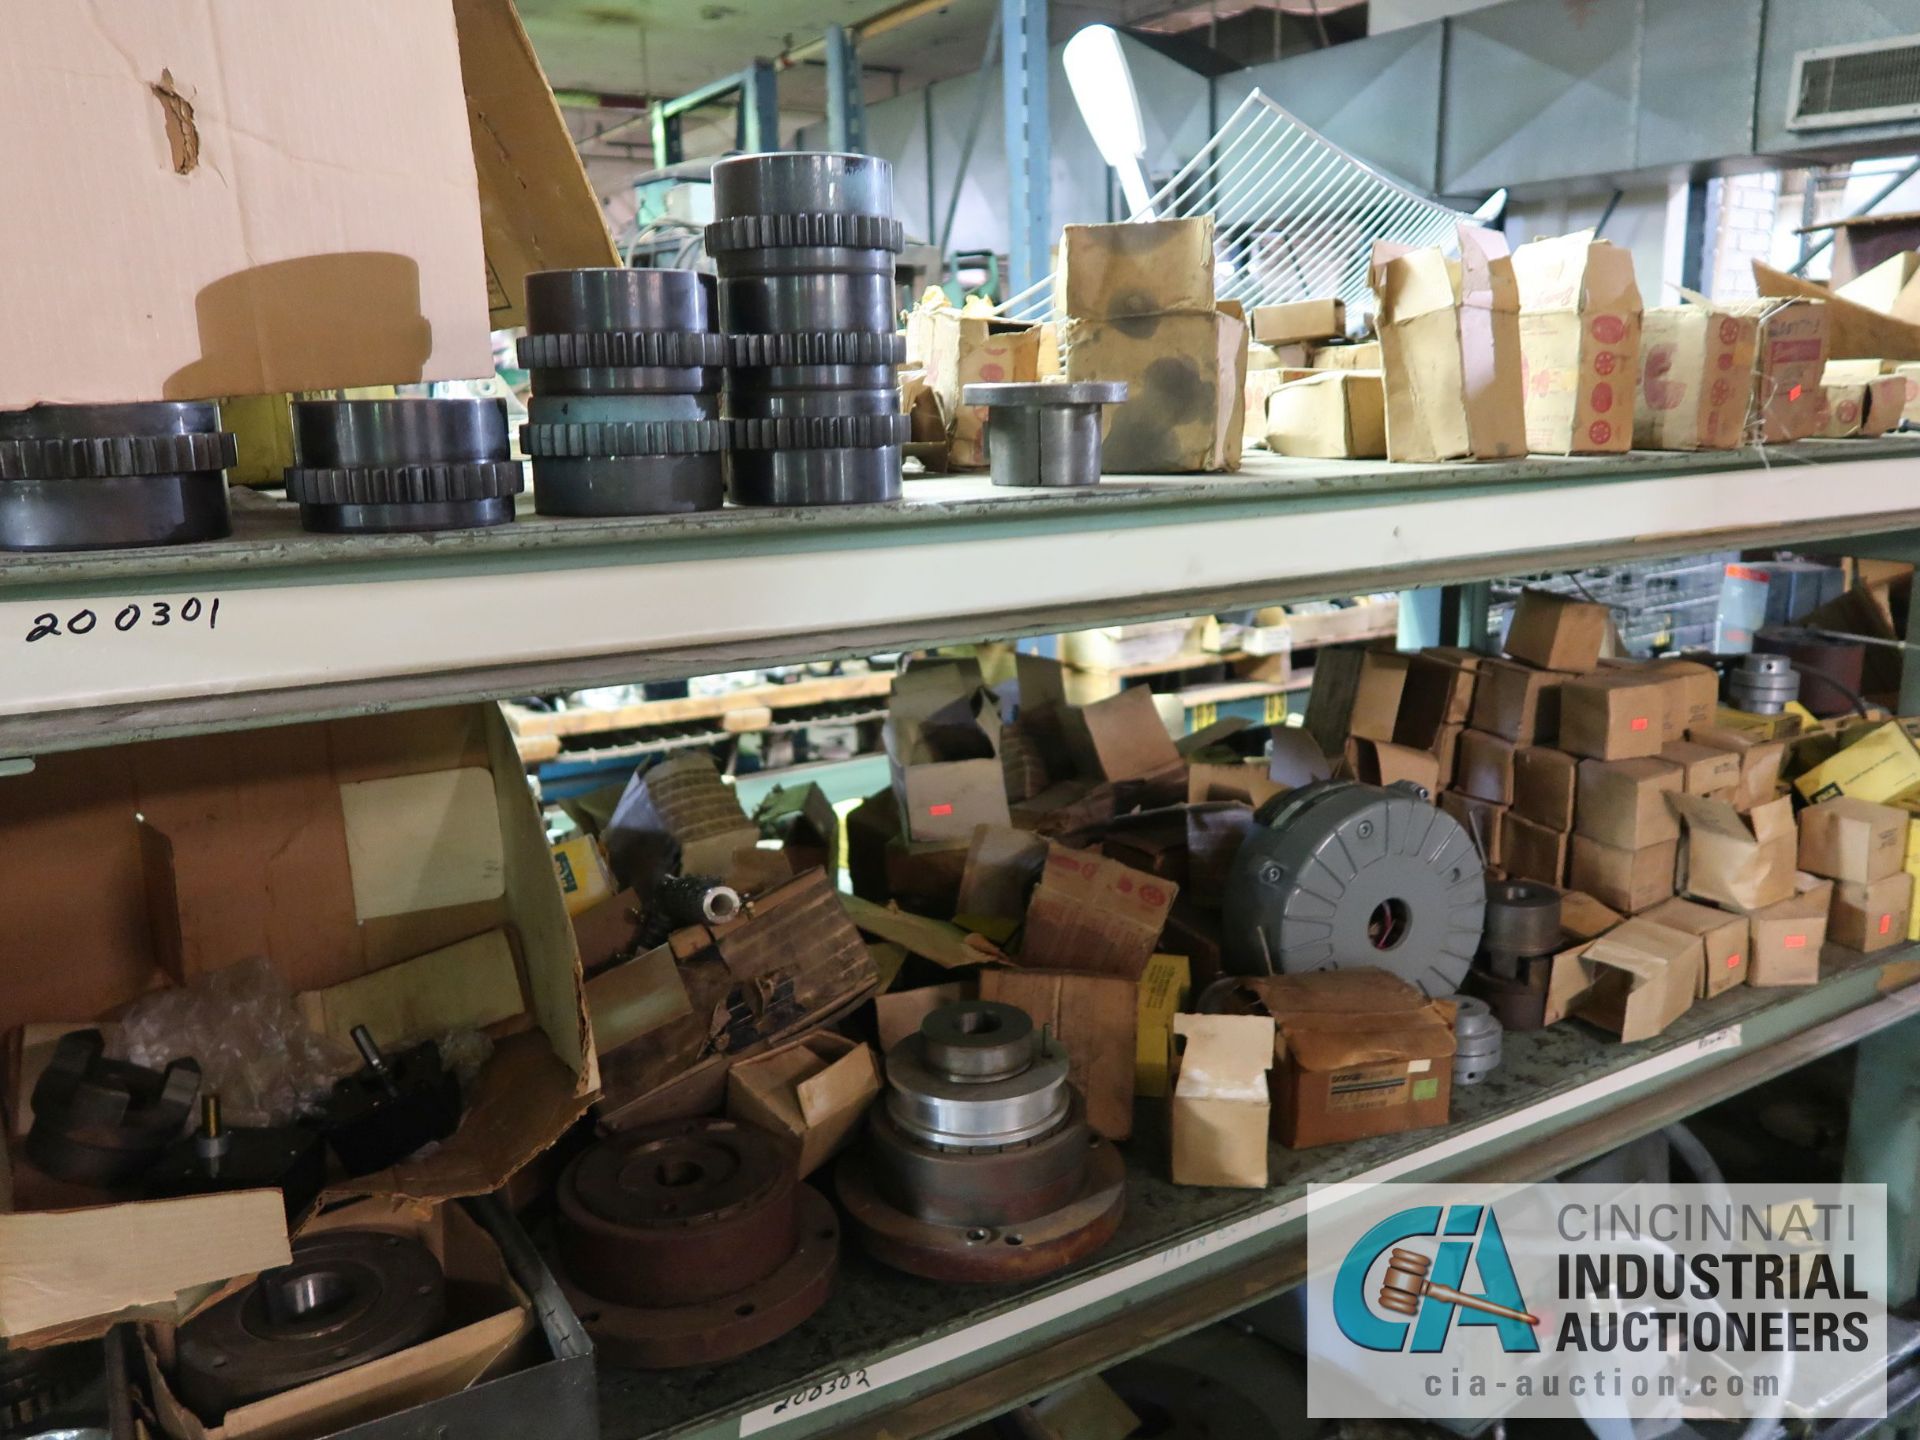 (LOT) MACHINE PARTS, COMPRESSORS, REDUCERS, GEARS, MOTORS, AND OTHER (4) SECTIONS RACK - Image 26 of 28